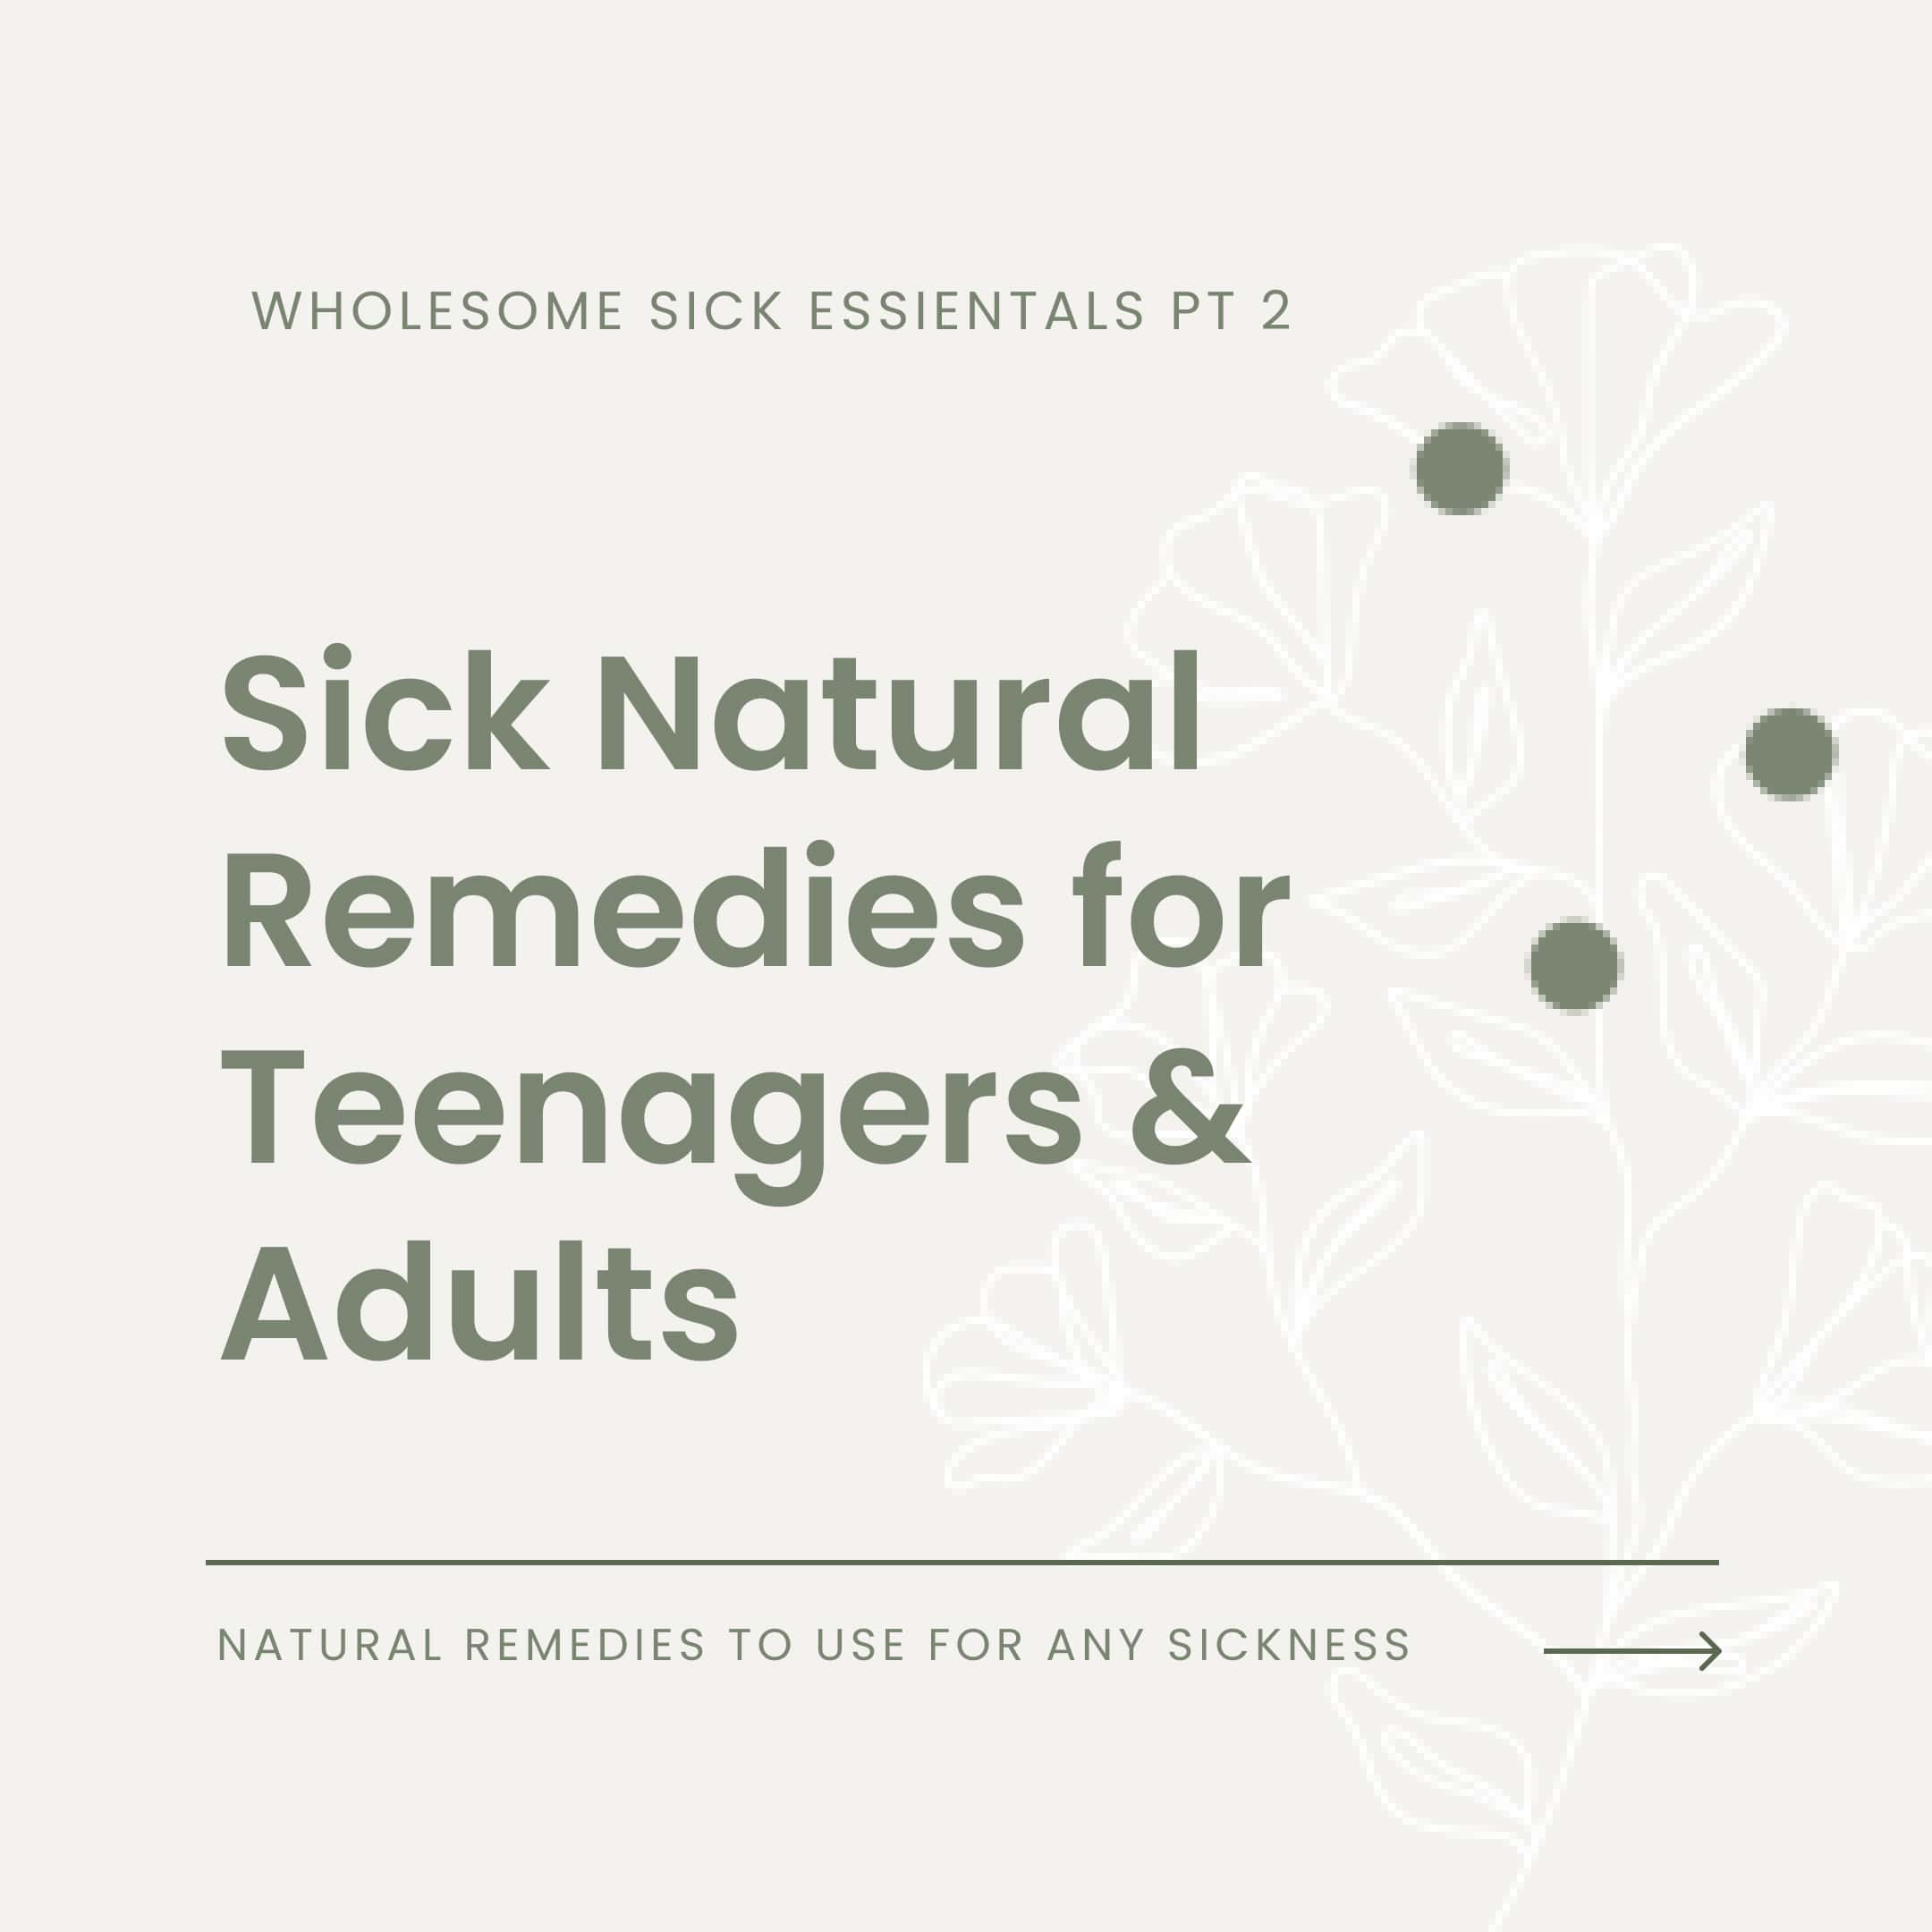 Sick Natural Remedies for Adults & Teenagers